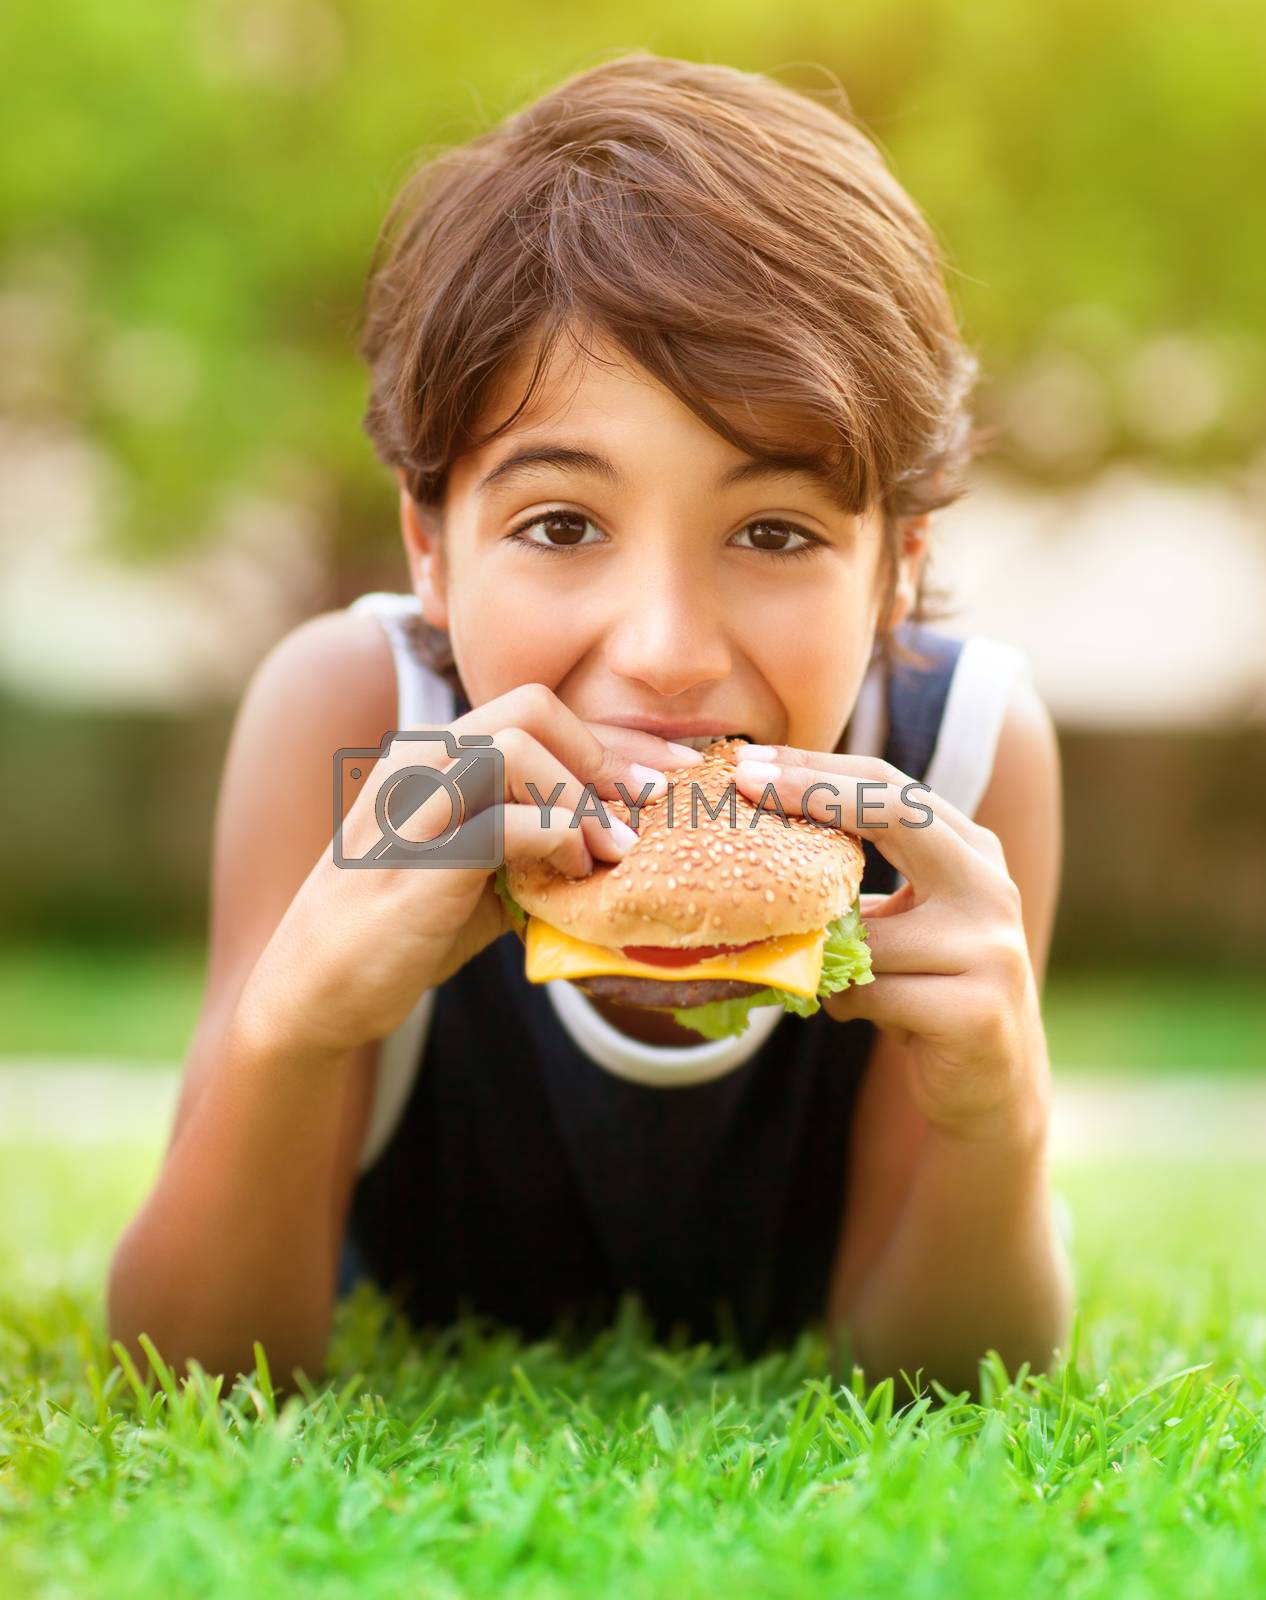 Royalty free image of Teen boy eating burger outdoors by Anna_Omelchenko